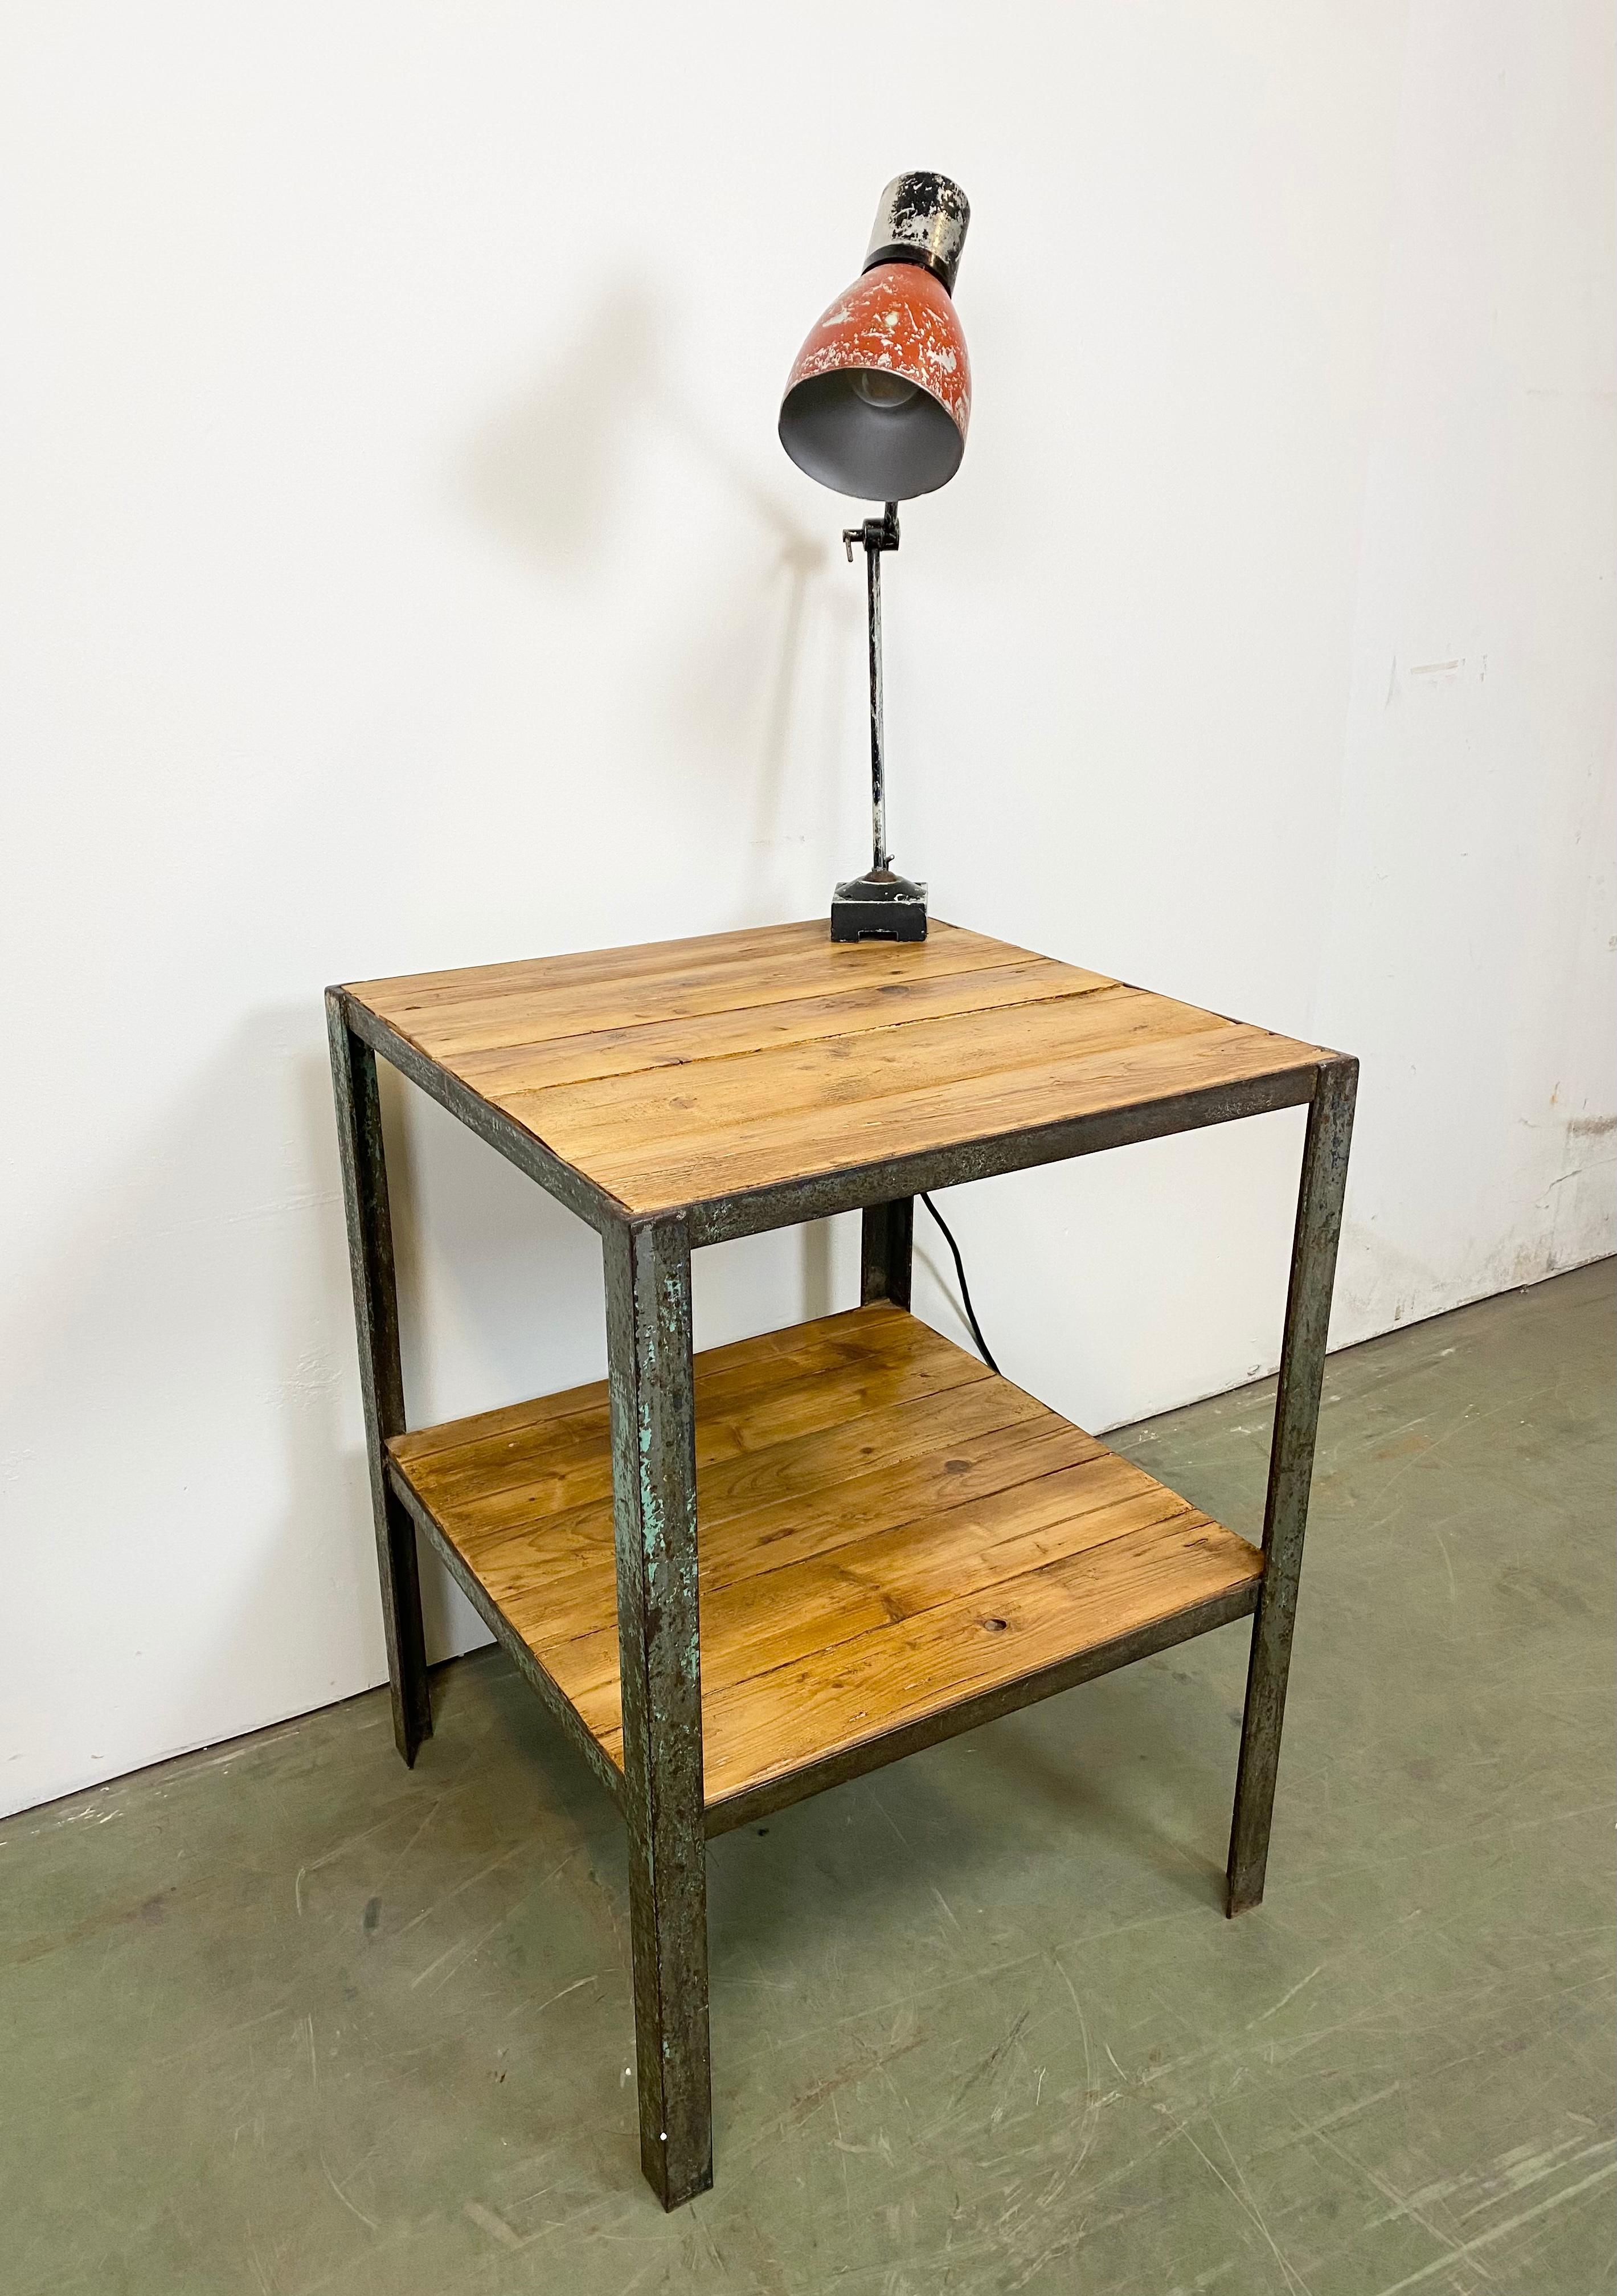 Czech Industrial Table with Desk Lamp, 1960s